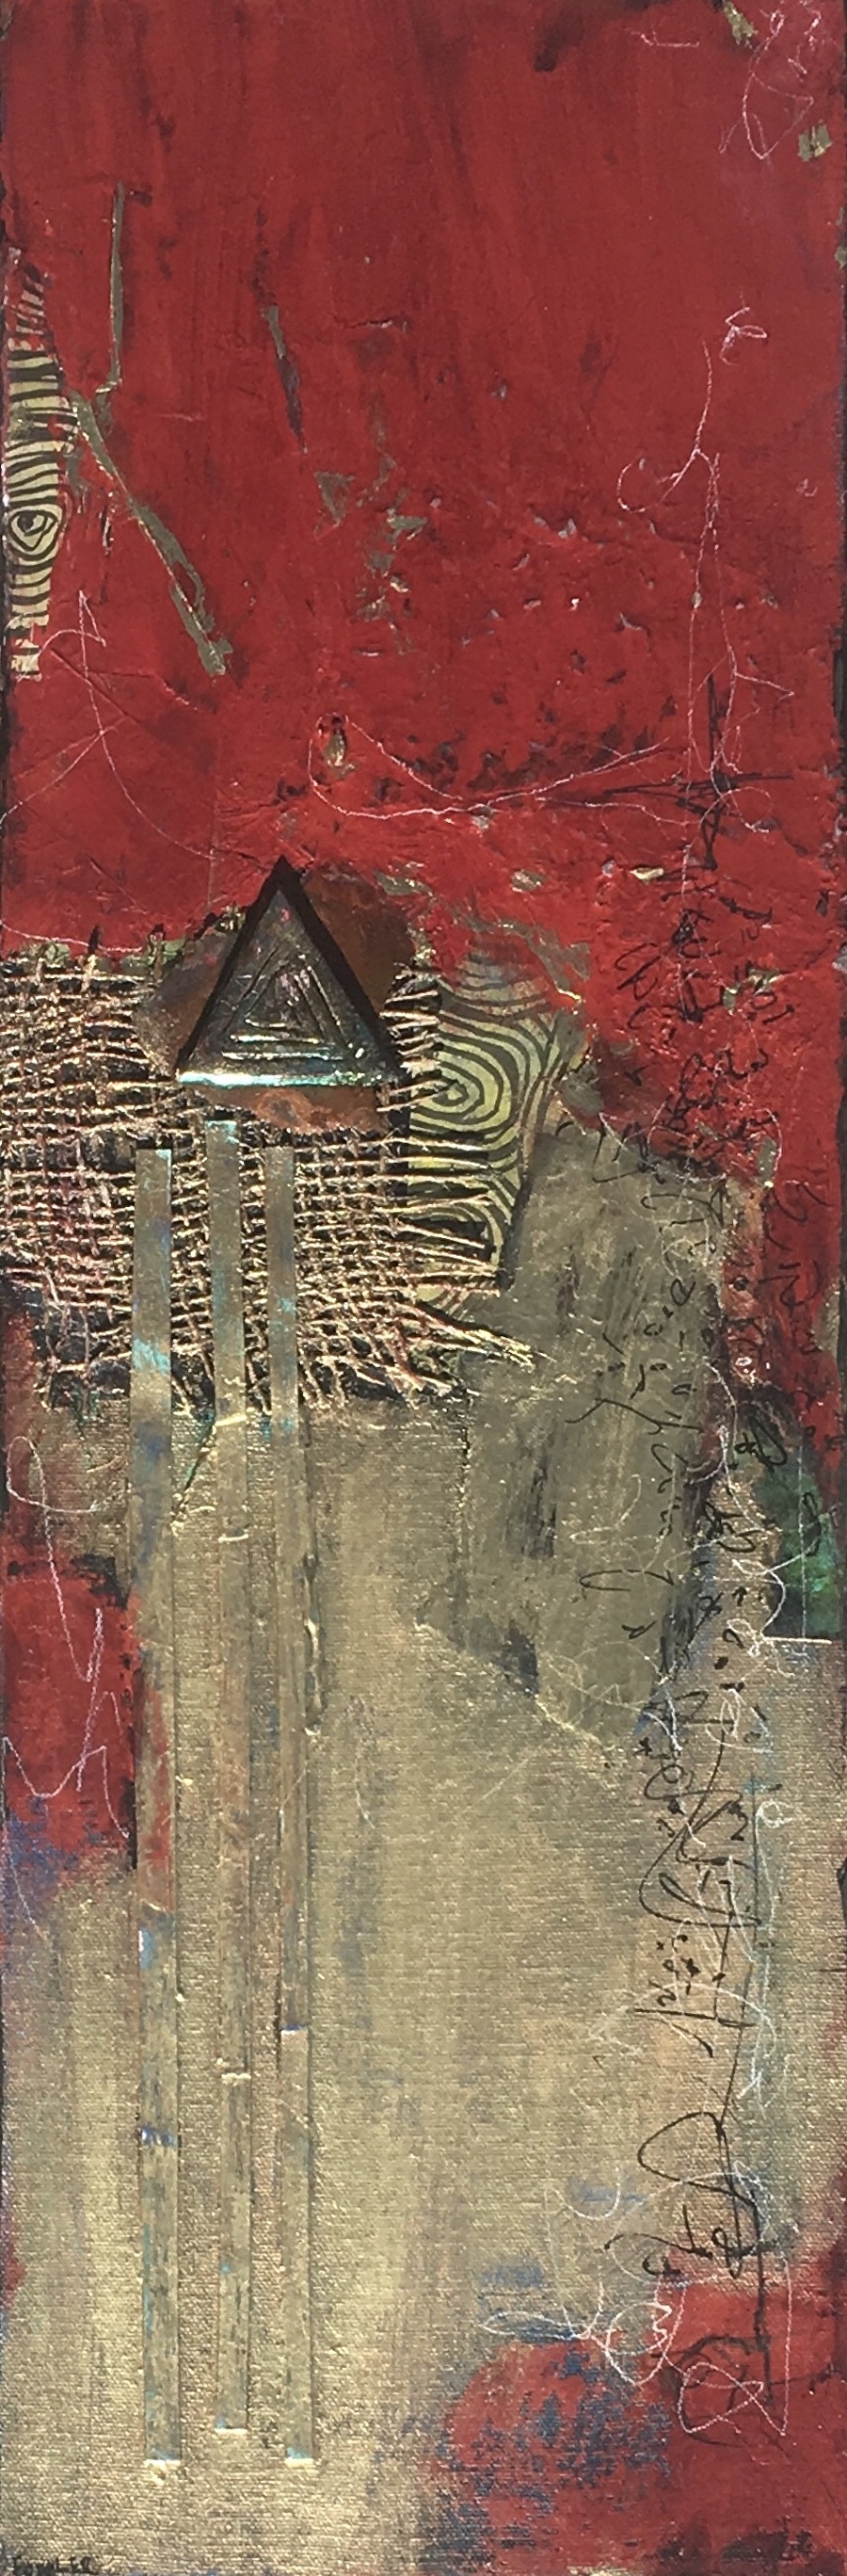 OLD IS NEW AGAIN by Pamela Lordi Collage, Found Objects ~ 24" x 8"